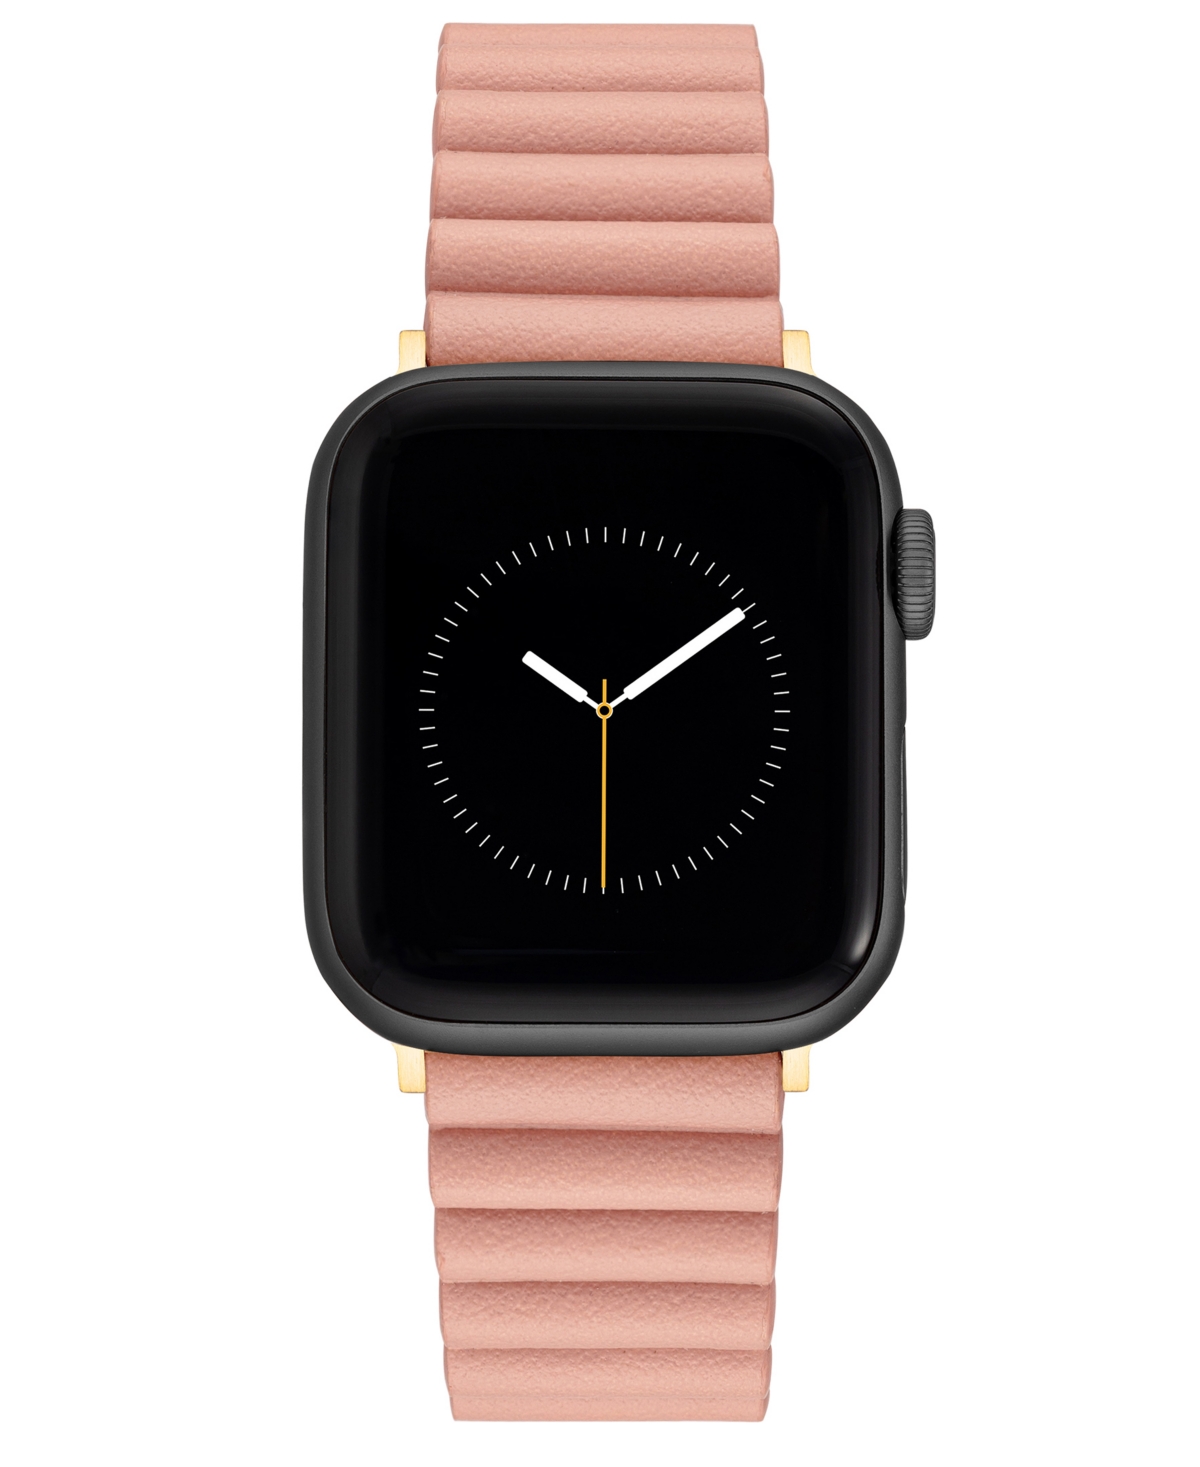 Women's Pink Polyurethane Leather Band Compatible with 42mm, 44mm, 45mm, Ultra and Ultra 2 Apple Watch - Pink, Rose Gold-Tone